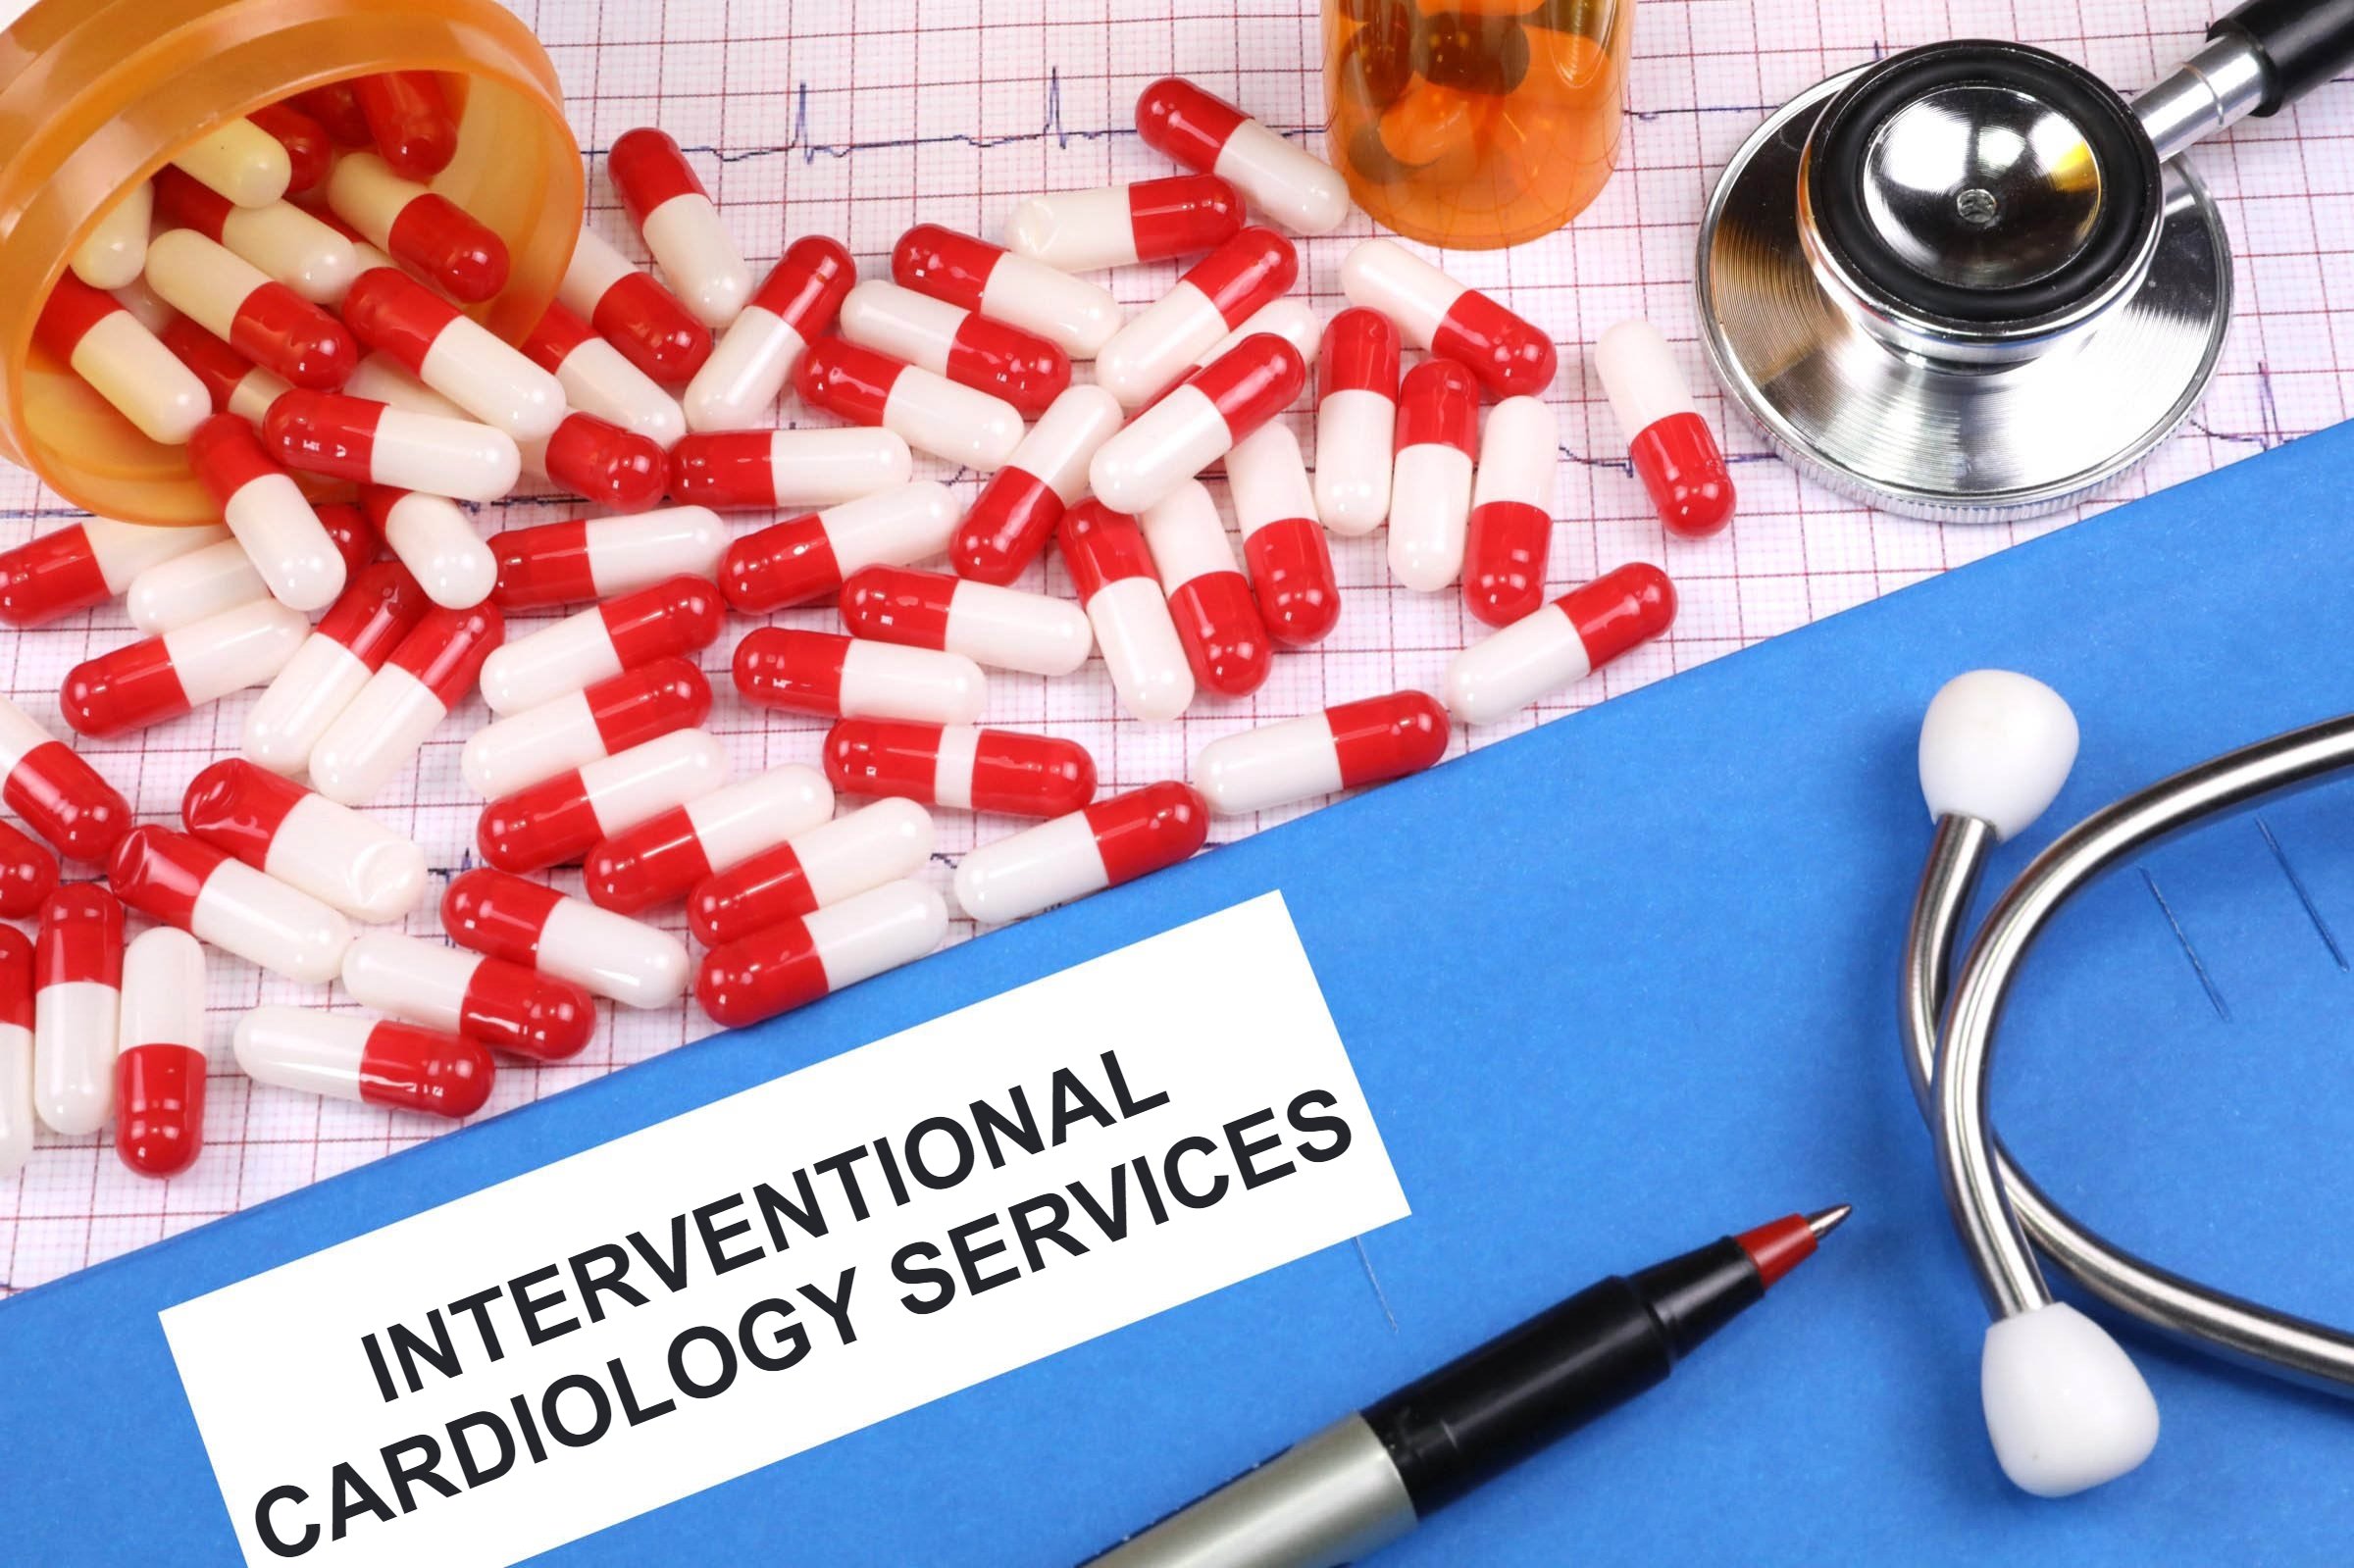 interventional cardiology services